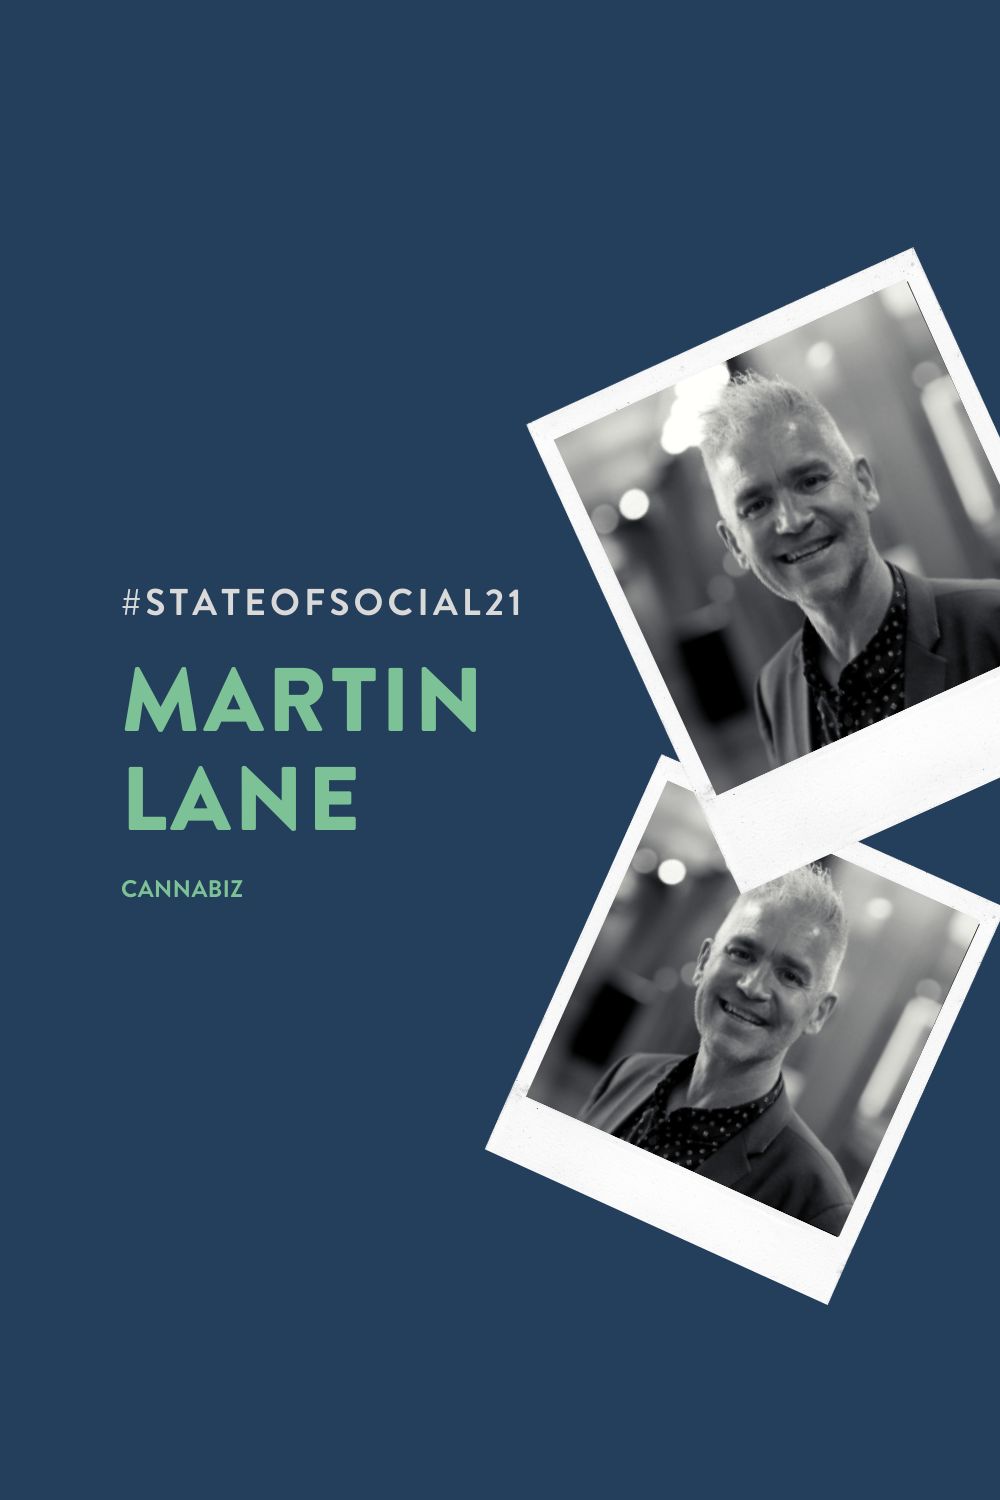 Get a dose of cannabis education from Martin Lane at SOS 21.